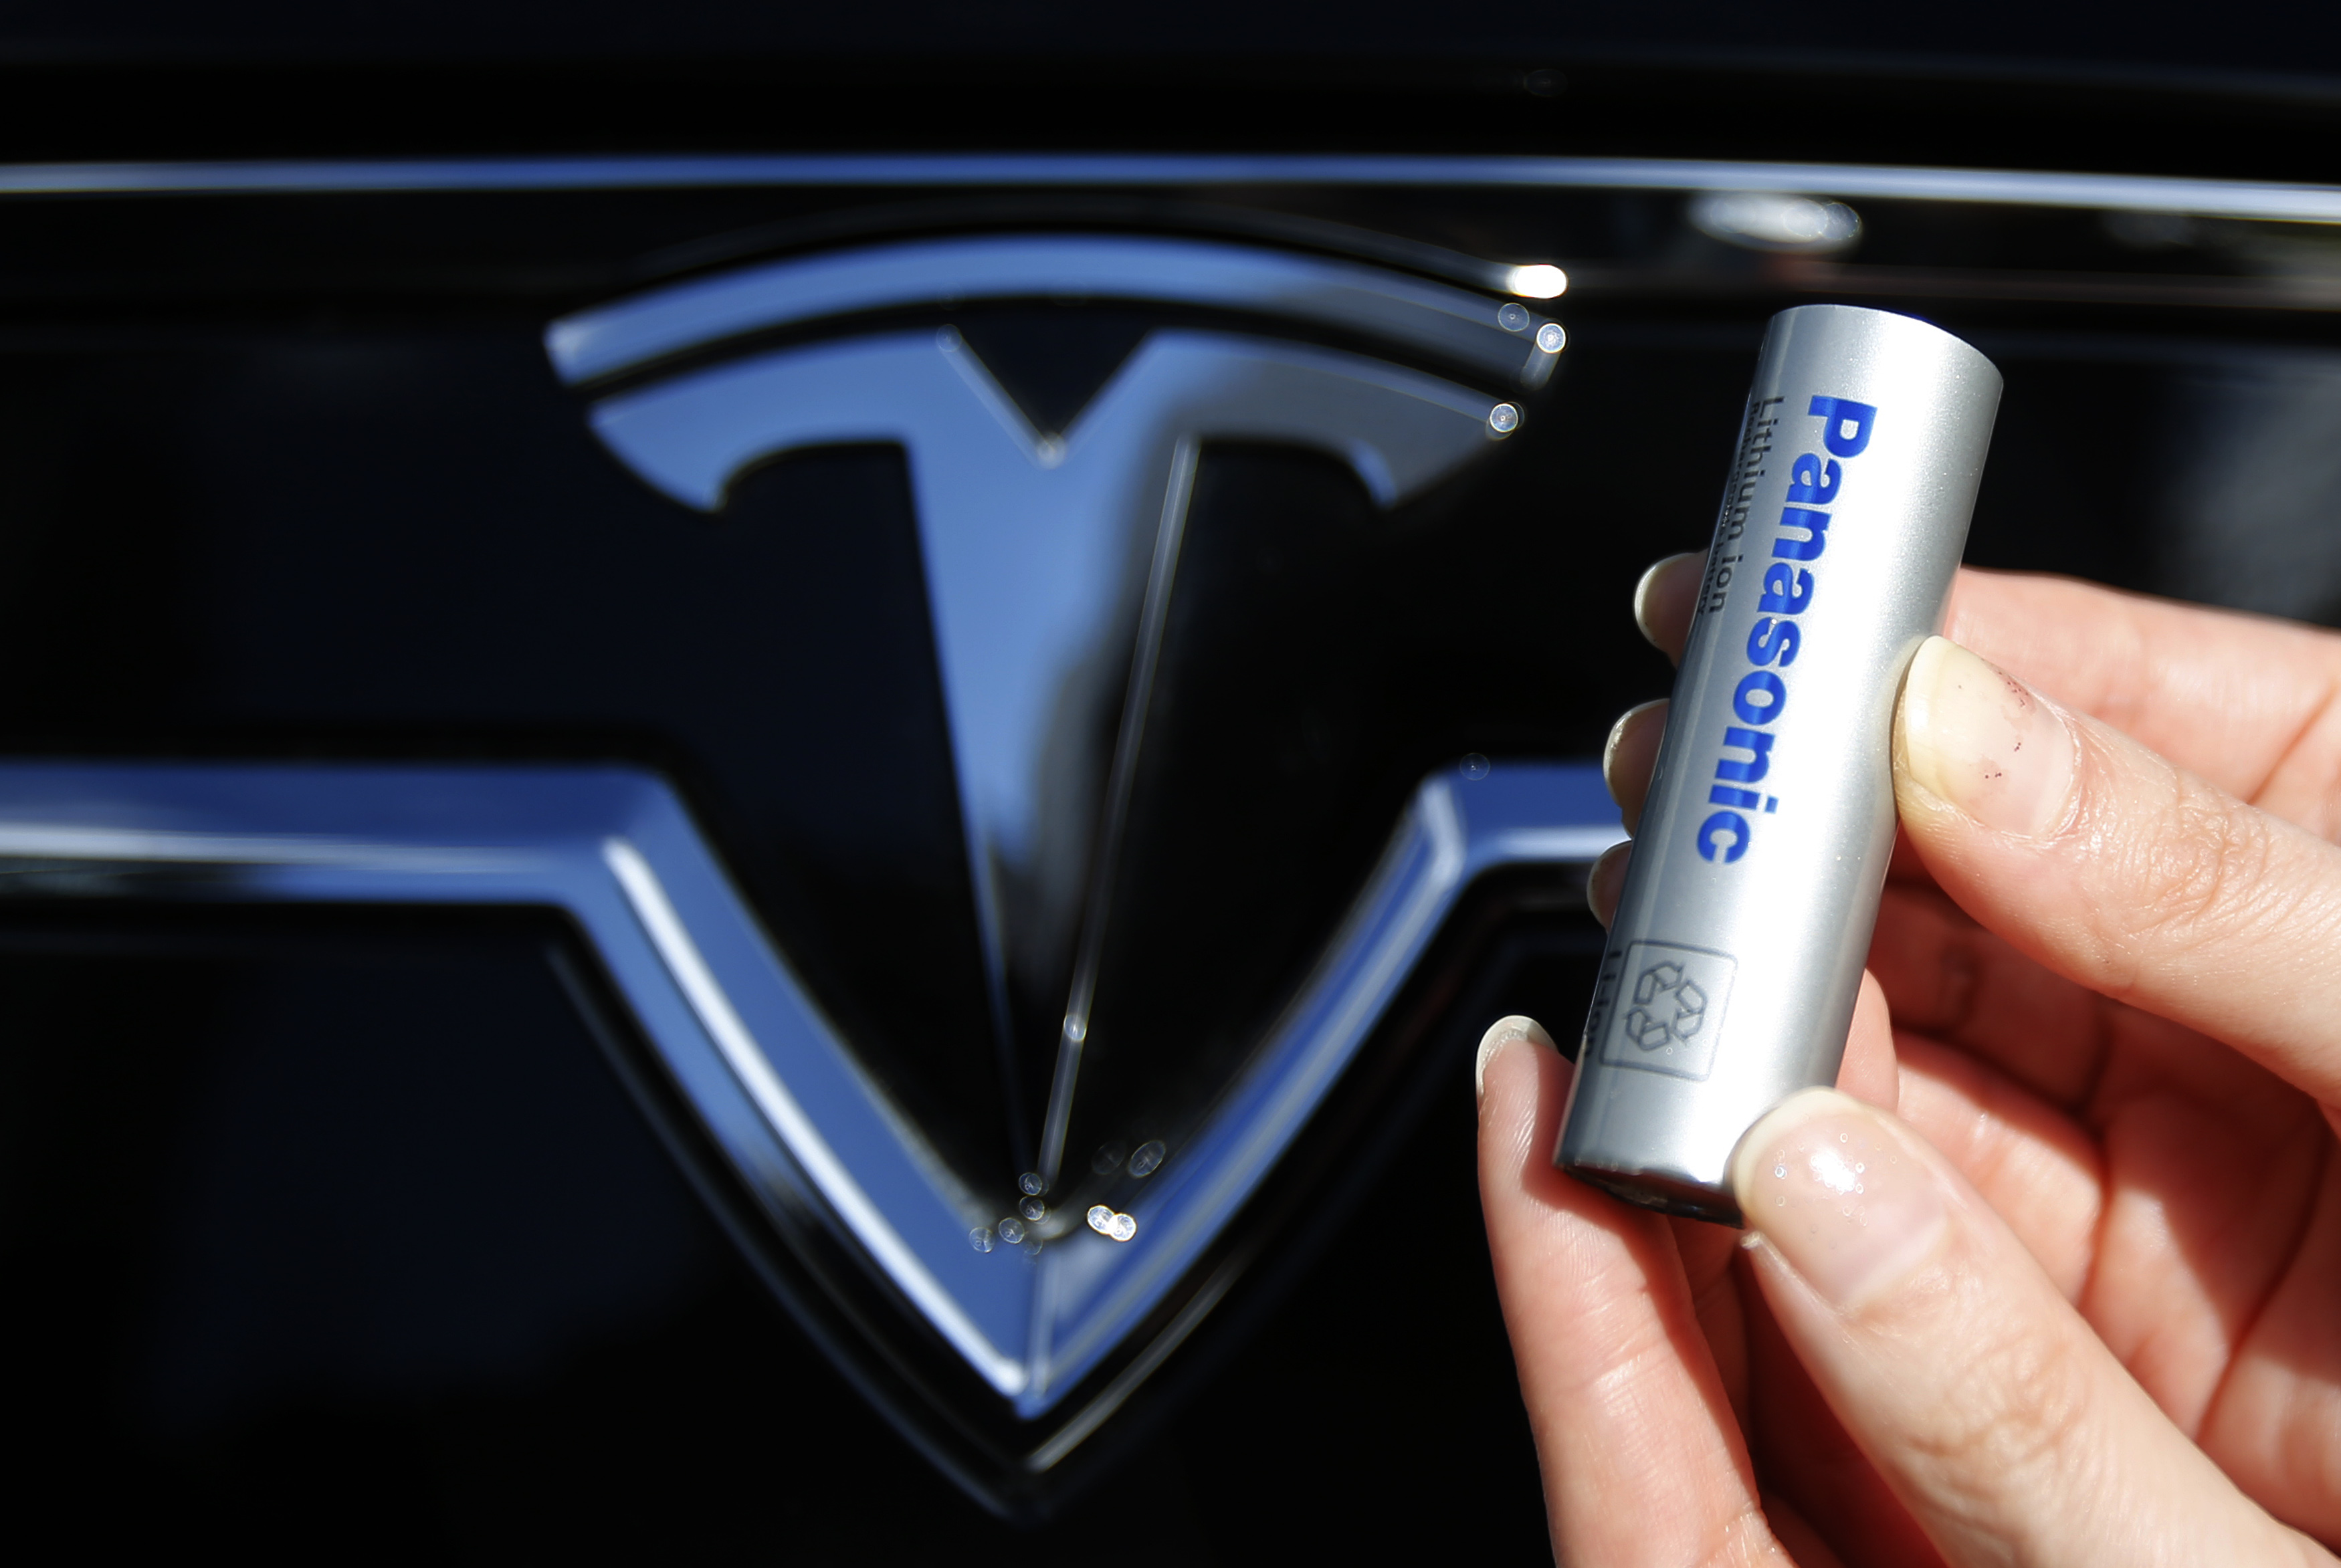 A Panasonic Corp's lithium-ion battery, which is part of Tesla Motor Inc's Model S and Model X battery packs, is pictured with Tesla Motors logo during a photo opportunity at the Panasonic Center in Tokyo, ahead of the 2013 Tokyo Motor Show, November 19, 2013. The Tokyo Motor Show will be held from November 22 to December 1. REUTERS/Yuya Shino (JAPAN - Tags: TRANSPORT BUSINESS LOGO) - RTX15JFN